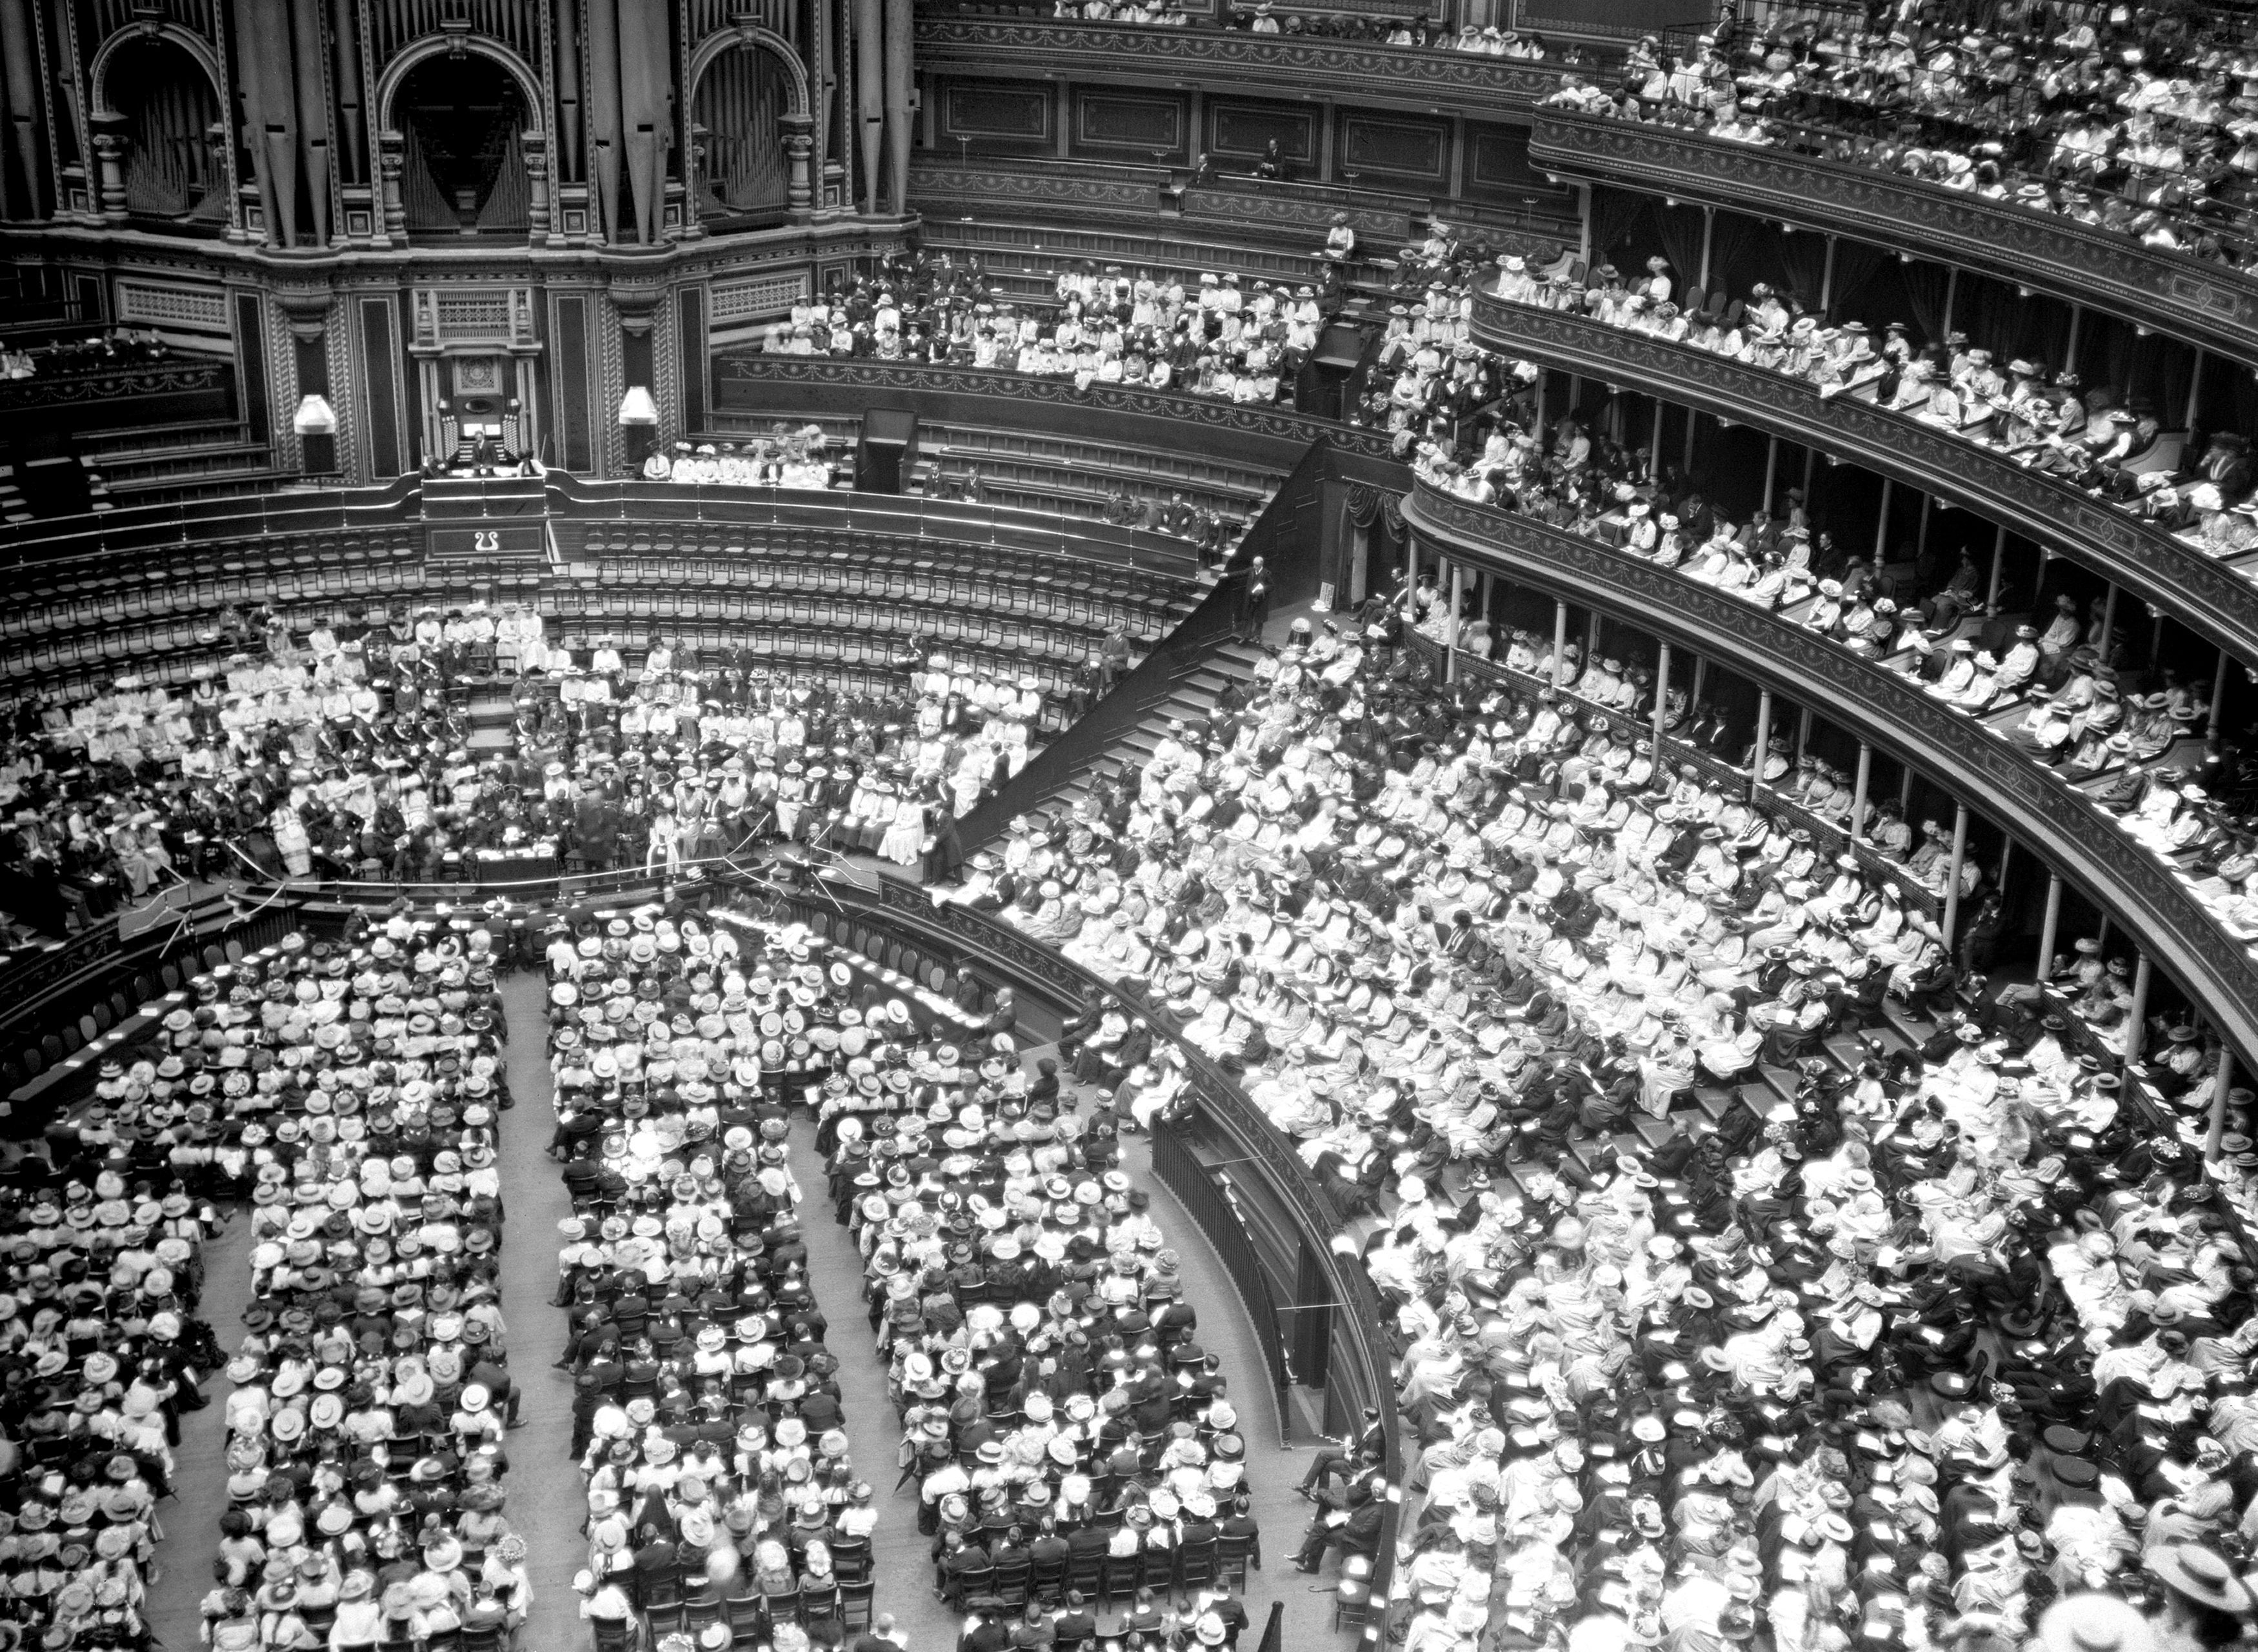 Suffragettes during a mass meeting at the Royal Albert Hall in 1913 (PA)